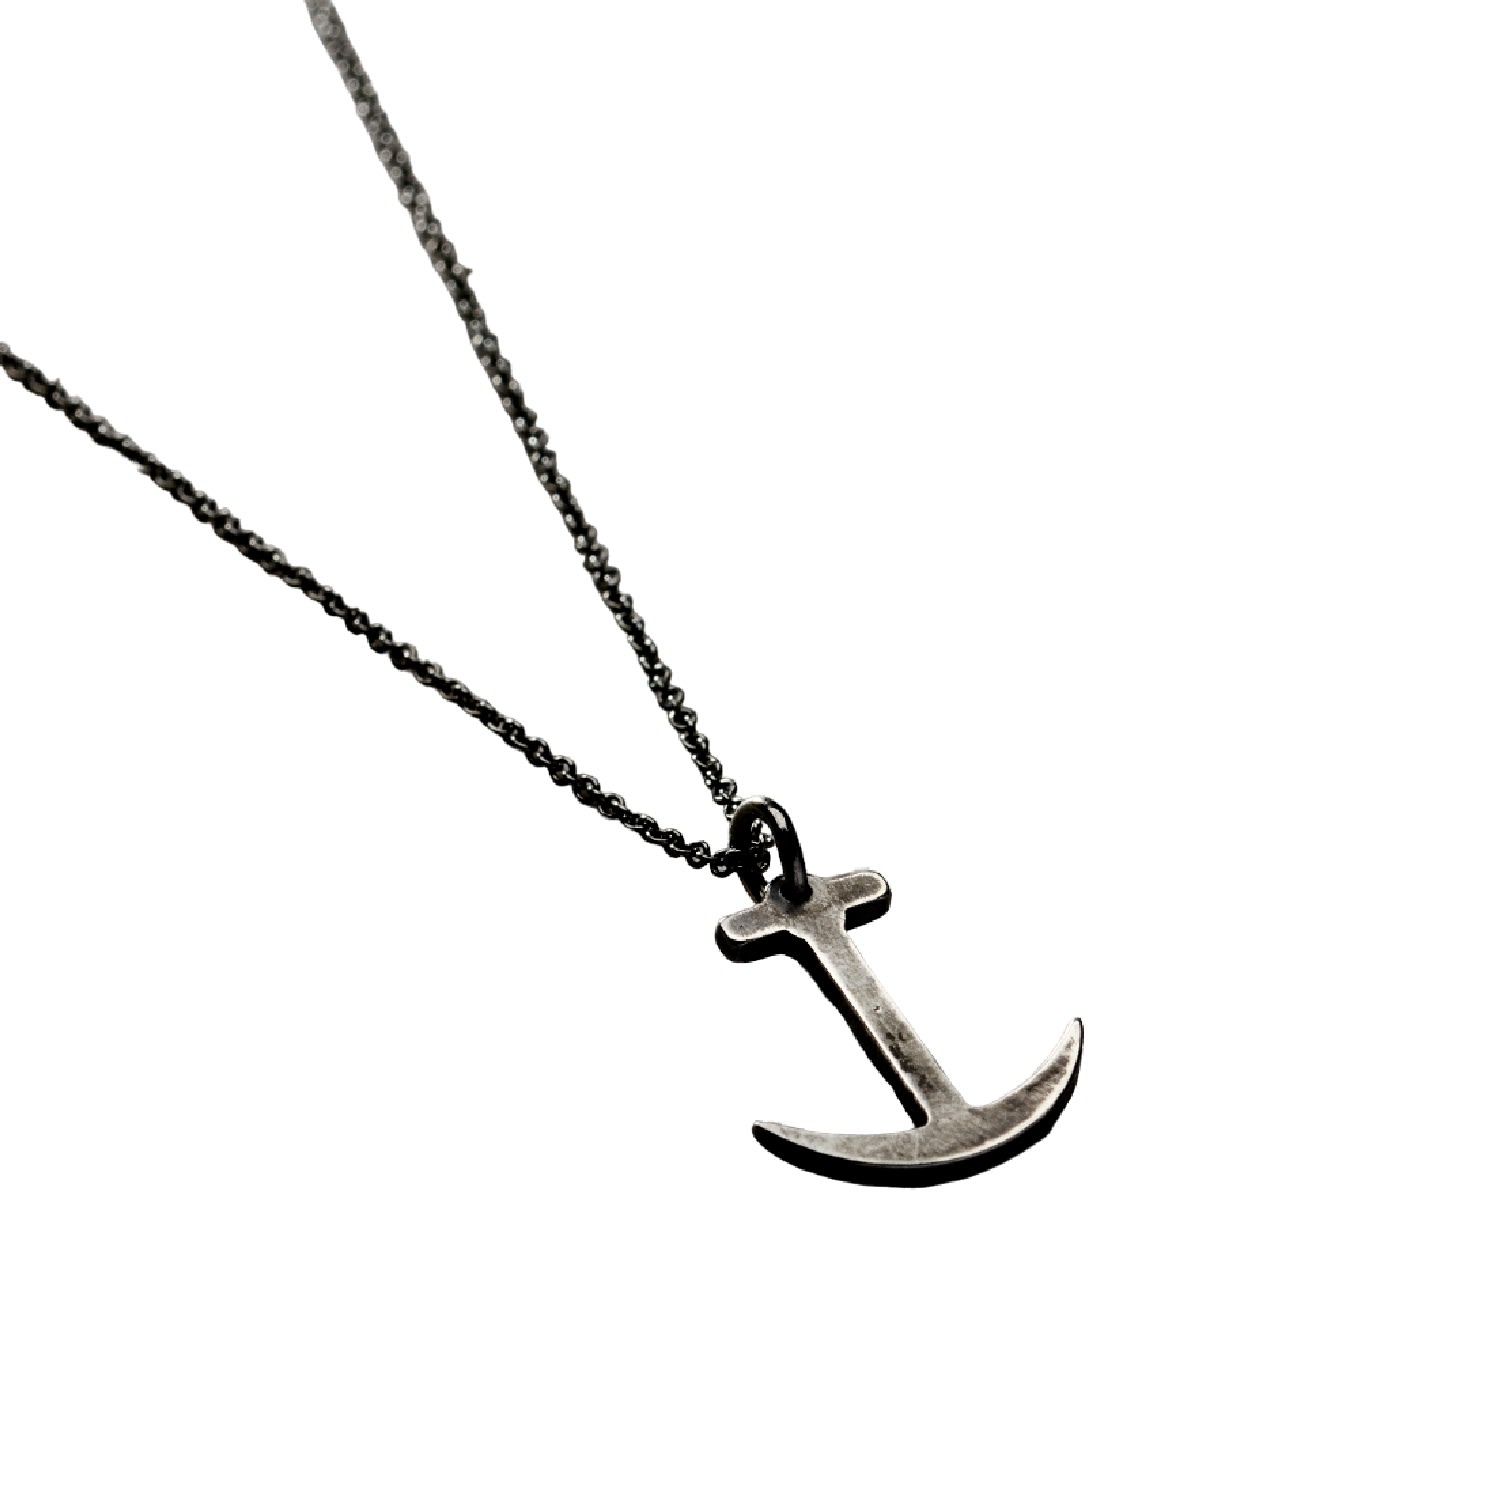 Oxidised Sterling Silver Mens Anchor Necklace Posh Totty Designs